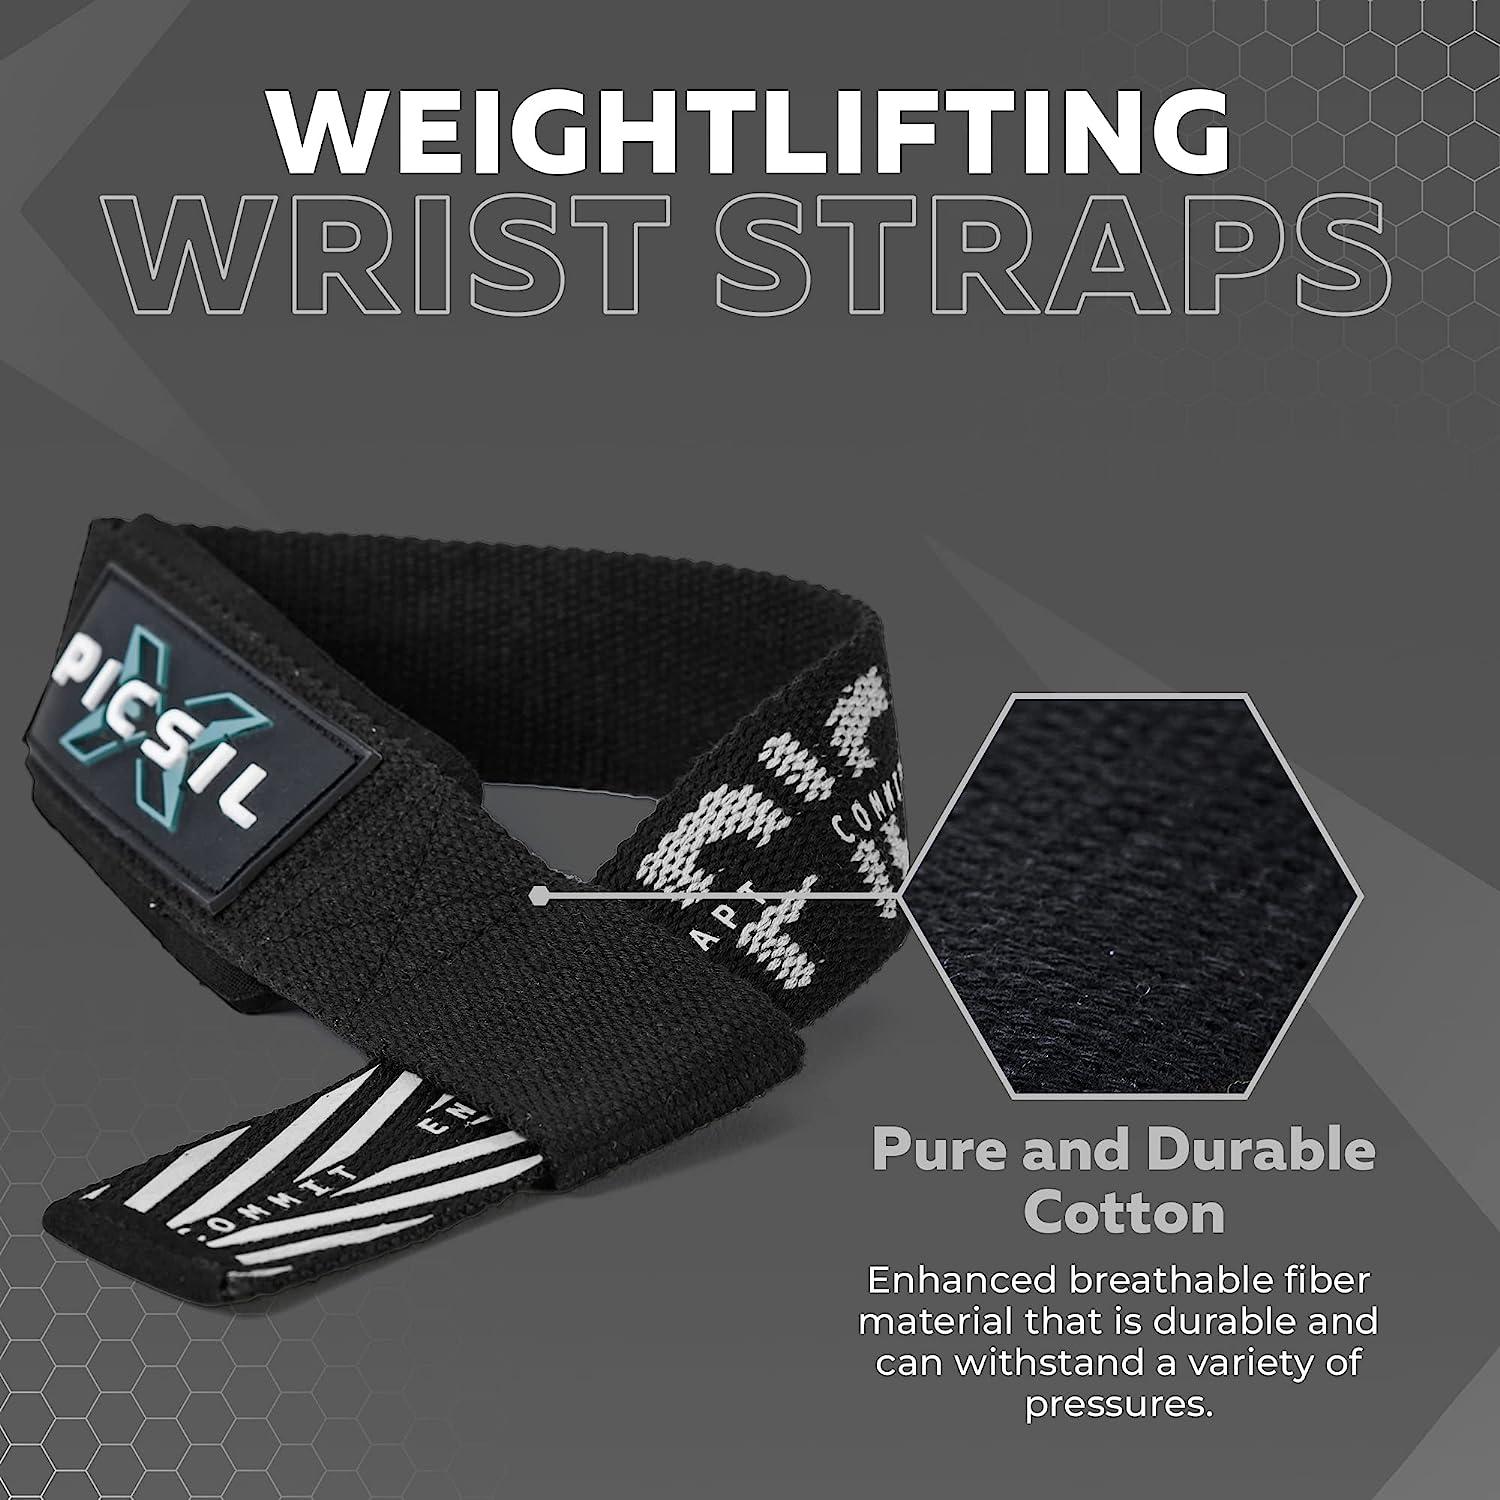  PICSIL Wrist Straps, Padded Wrist Straps for Weightlifting,  Extended Deadlift Straps for Grip Support, Advanced Weightlifting Straps  for Comfort and Stability, 1 Pair, Black : Sports & Outdoors